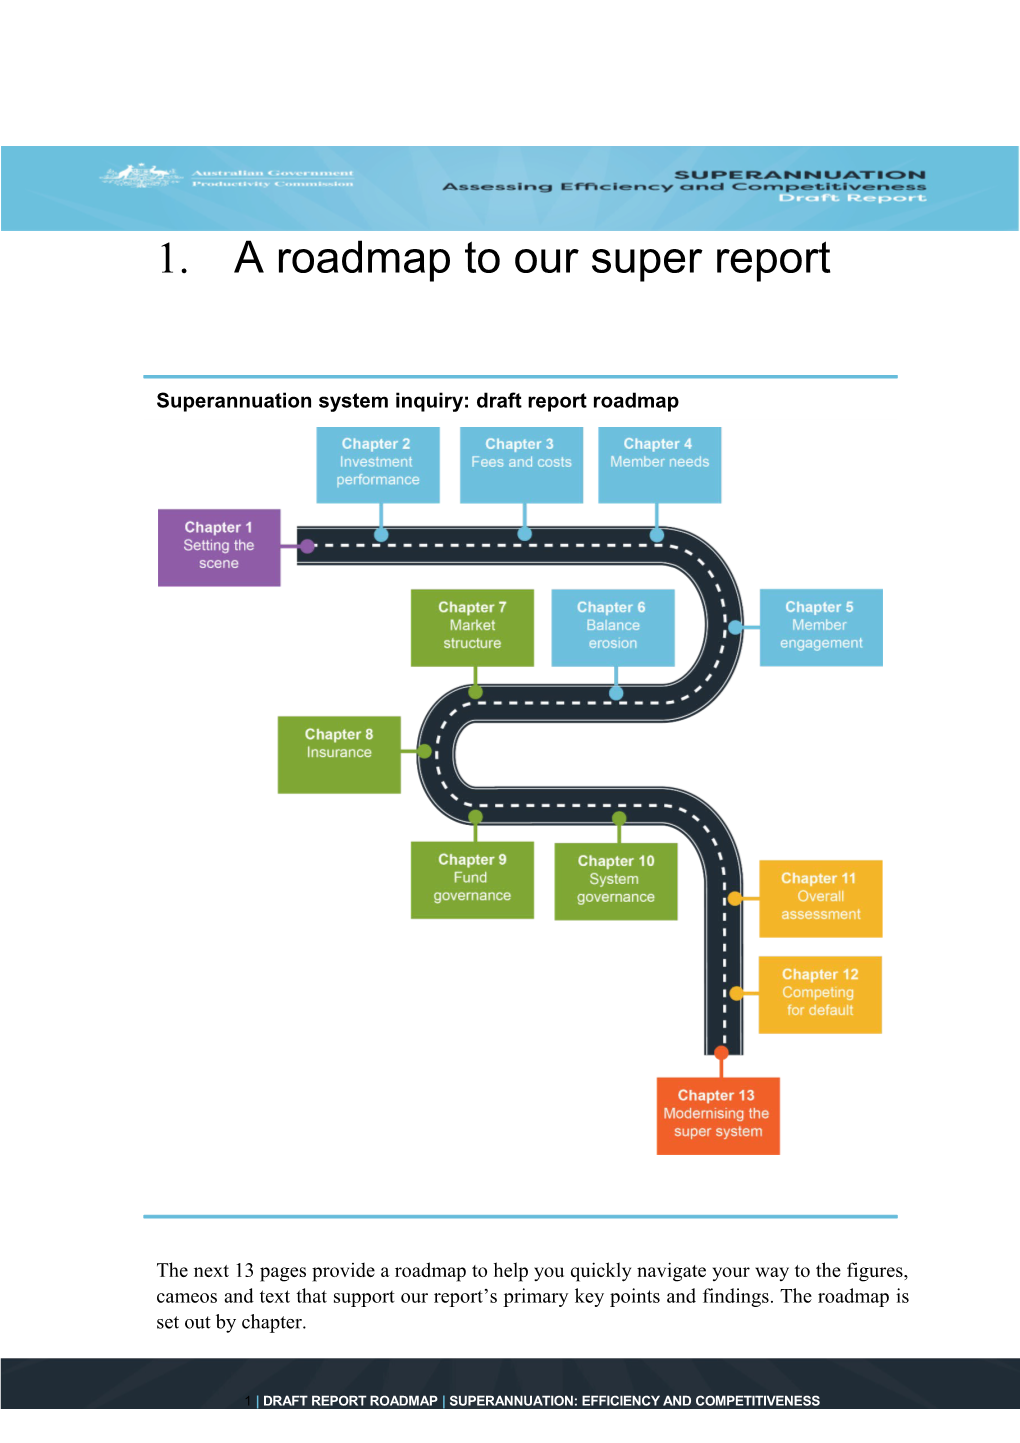 A Roadmap to Our Super Report